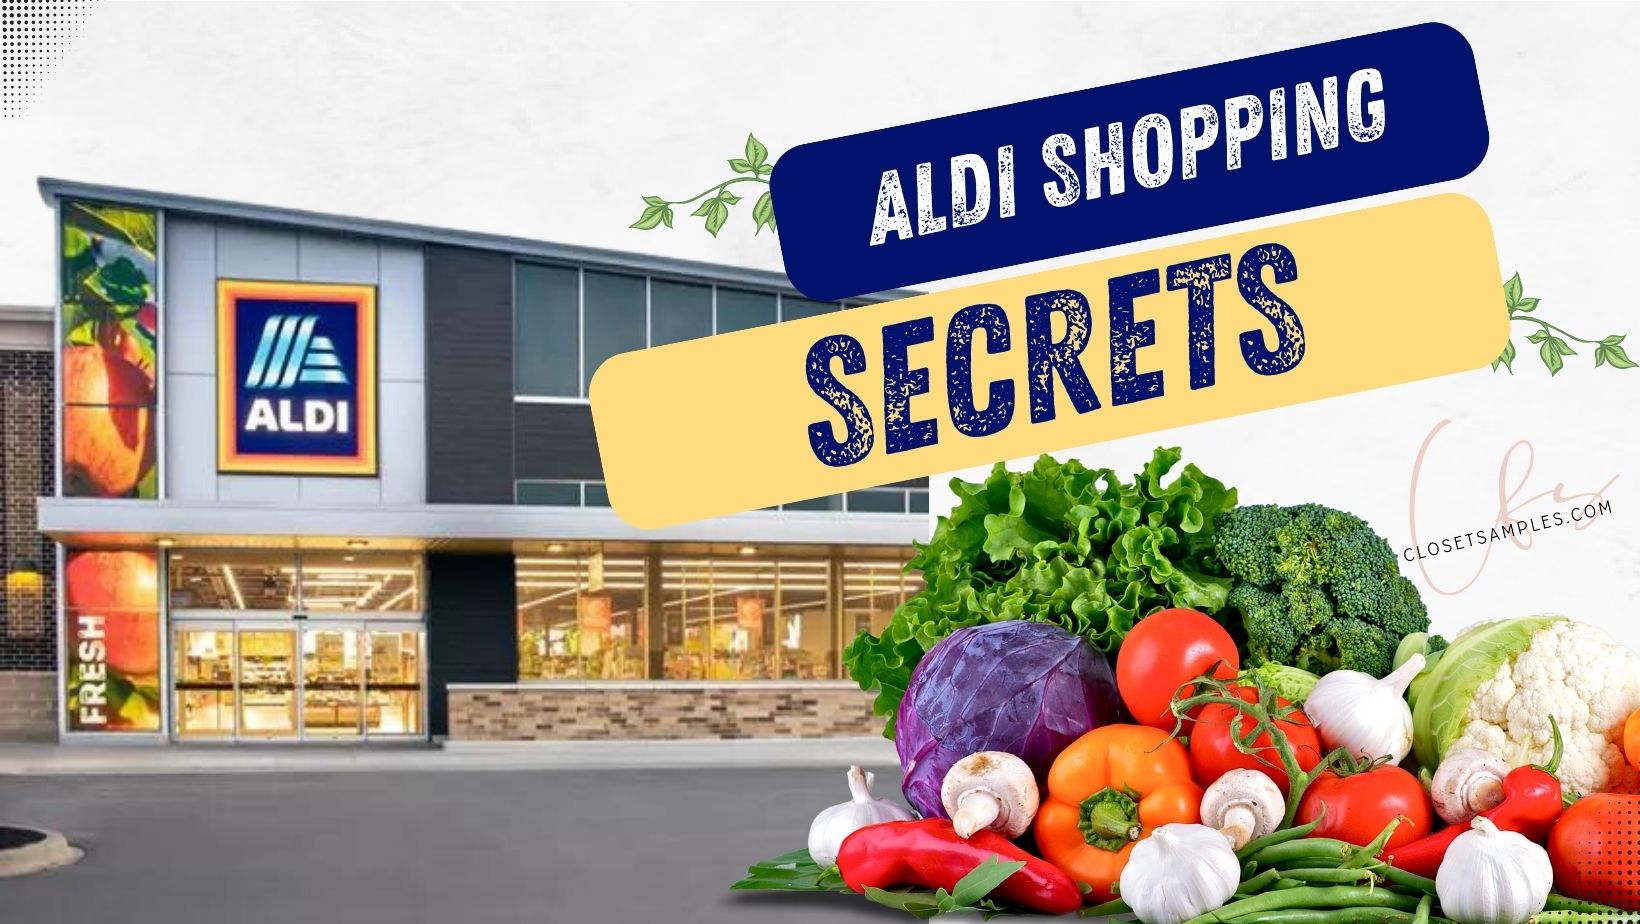 Save Big at Aldi with these Shopping Secrets closetsamples